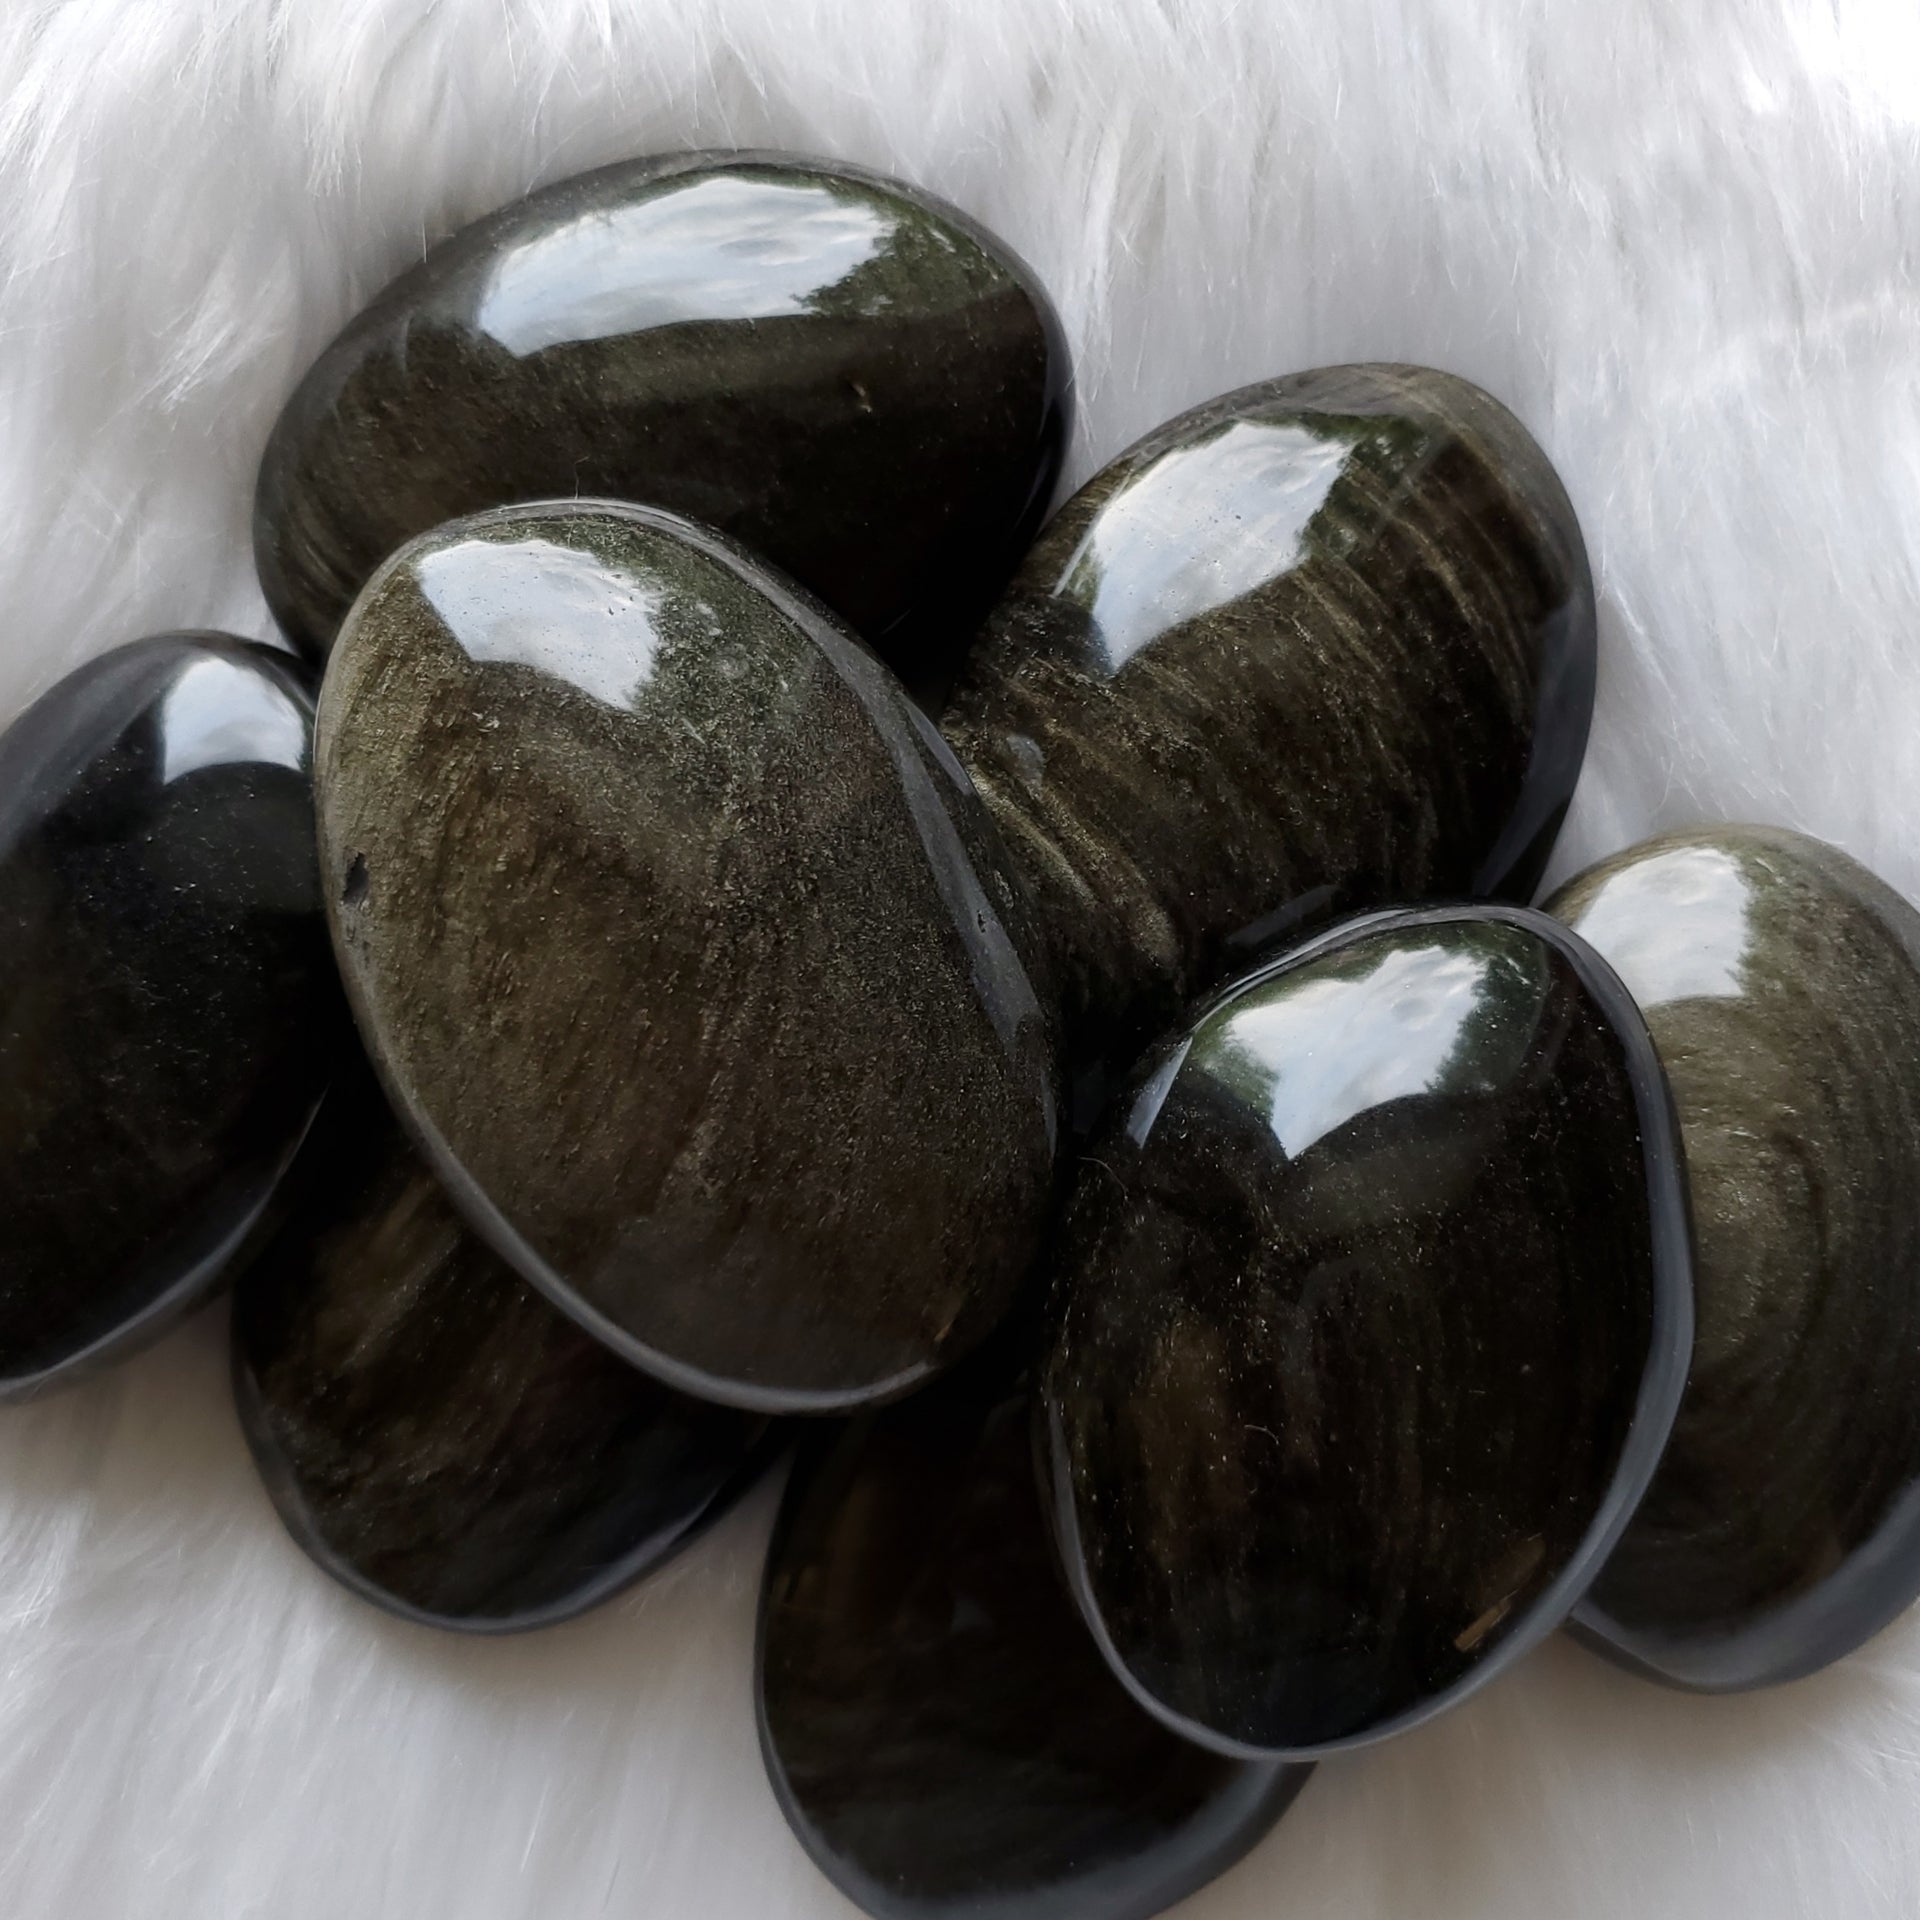 GOLD SHEEN OBSIDIAN LARGE PALM STONE